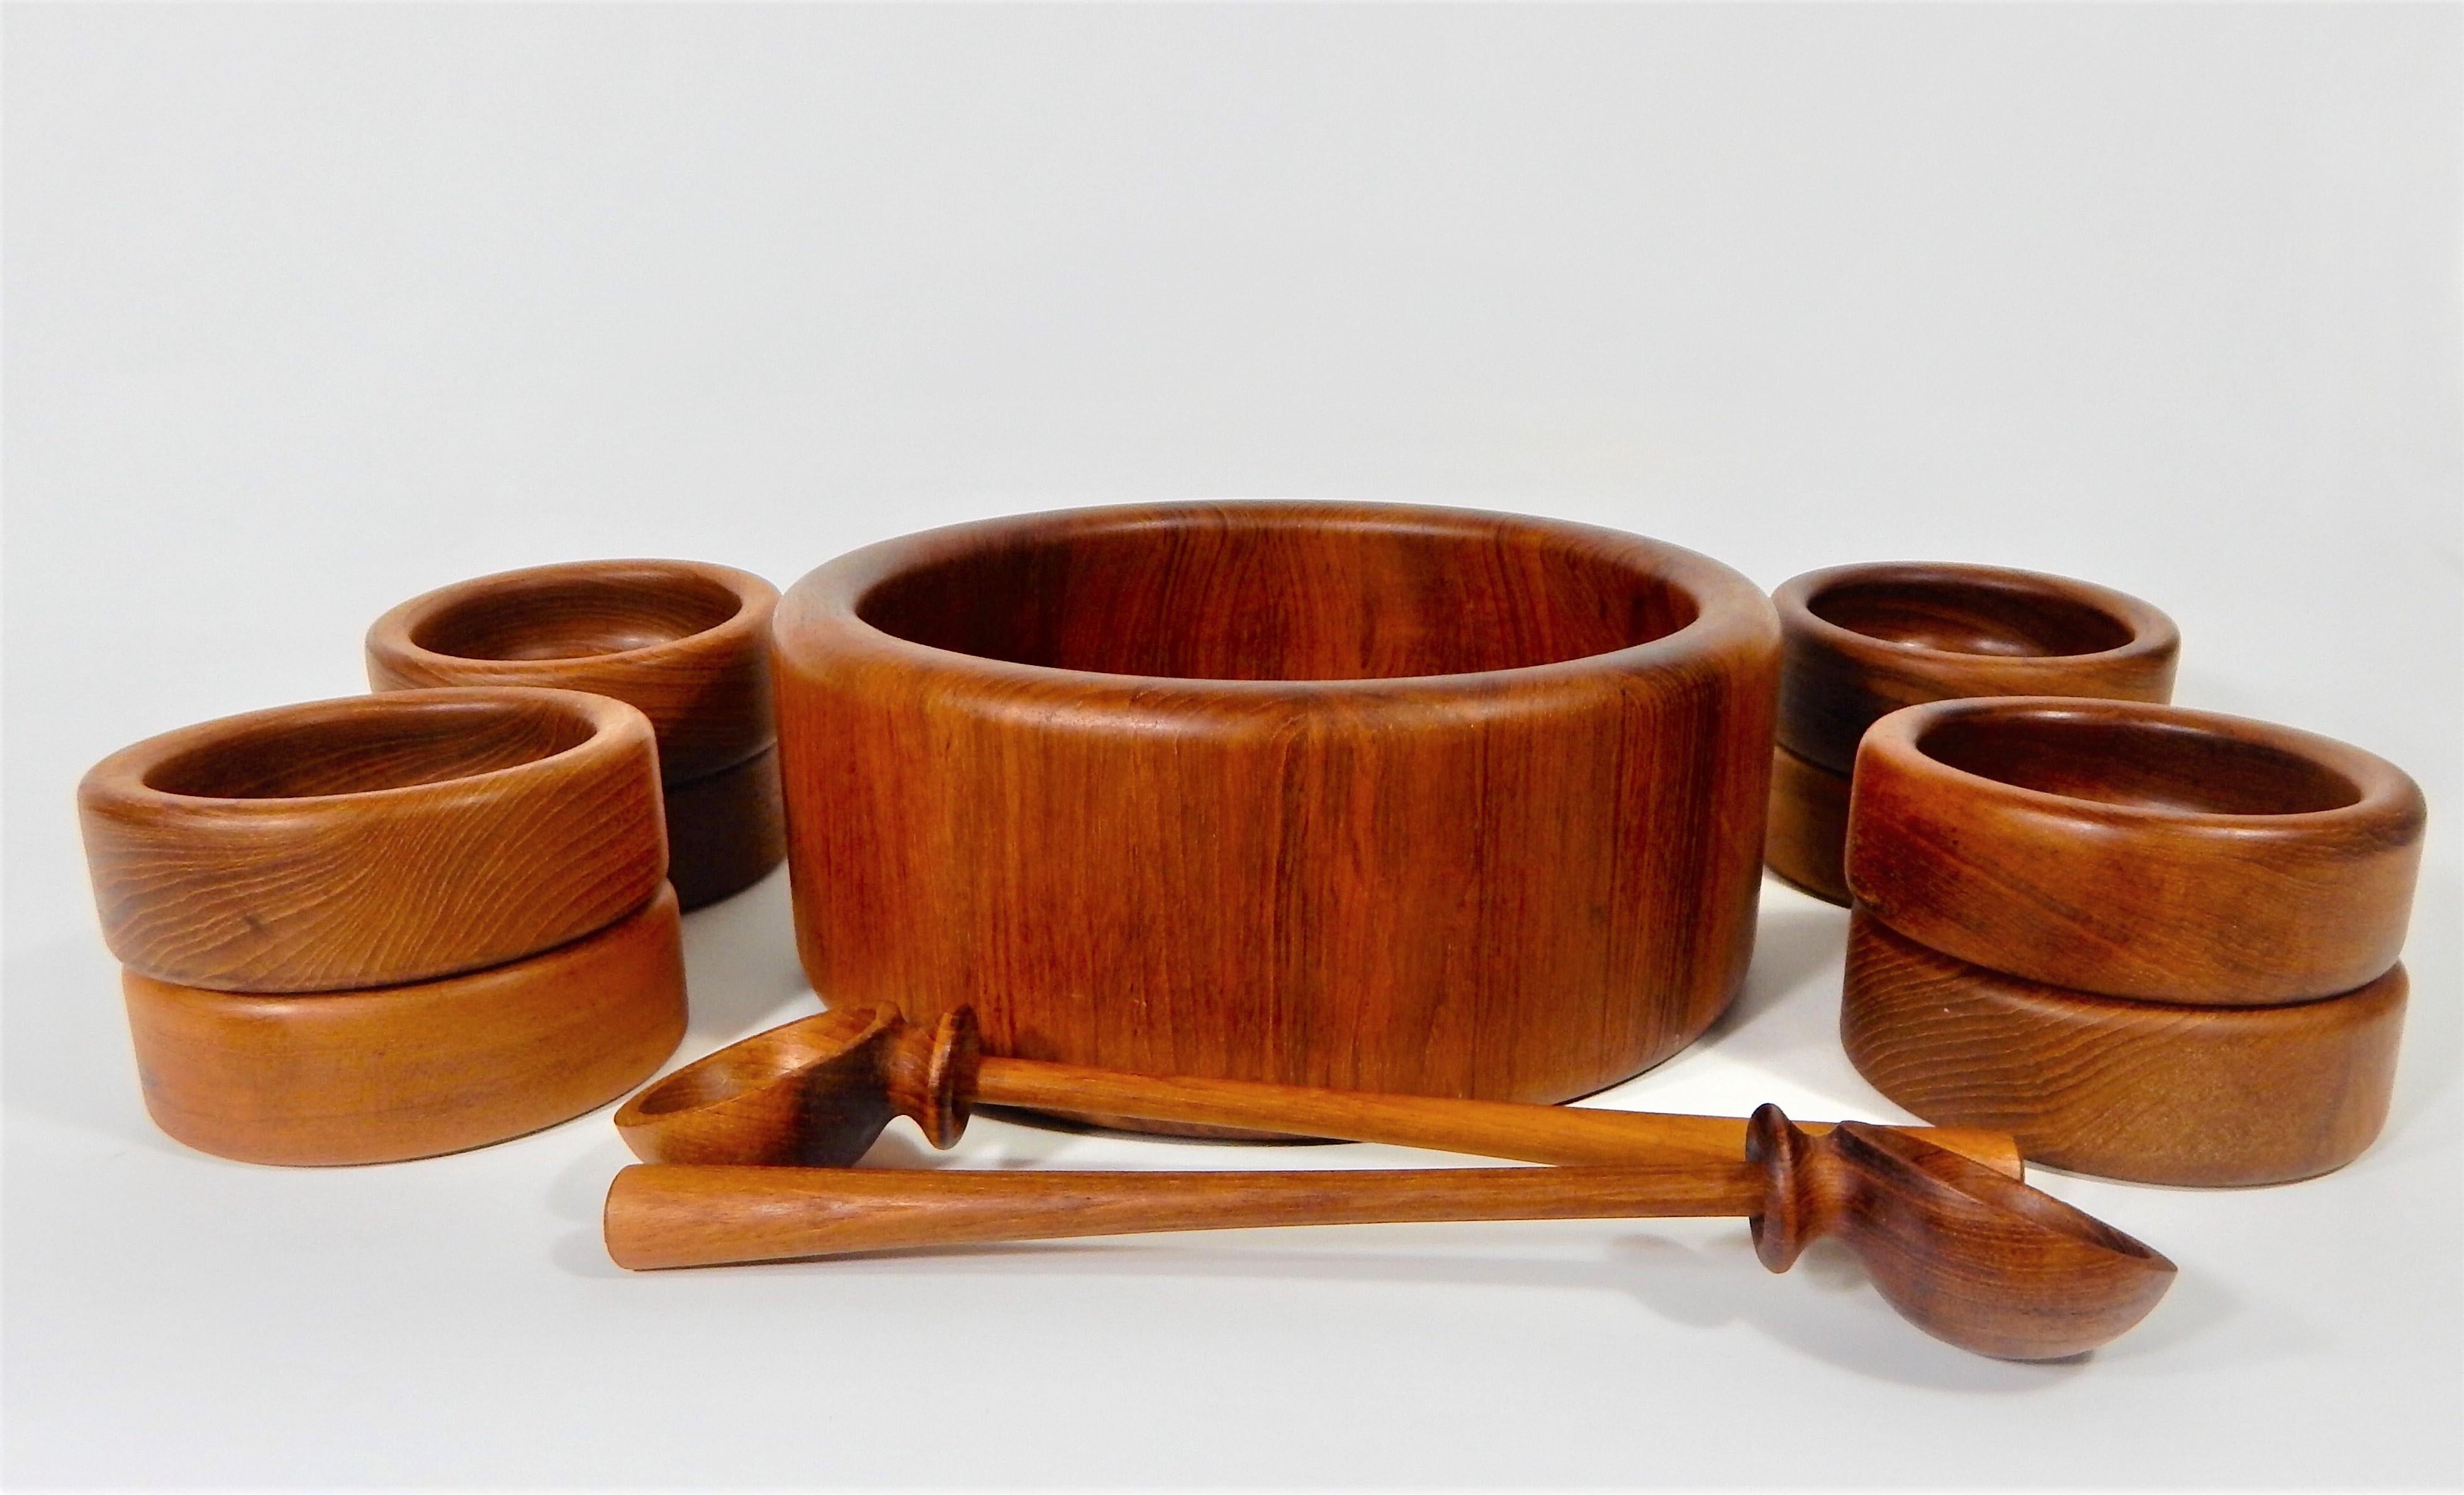 Midcentury 1960s 11-piece Teak Bowl or Salad set by Nissen, Denmark. 
Serves eight. Entire set is made of teak. Entire set is in excellent condition.
Measures: One large bowl 12 x 5
Eight small bowls 5.5 x 2
Two unique utensils 13 x 2.75 x 2.5.